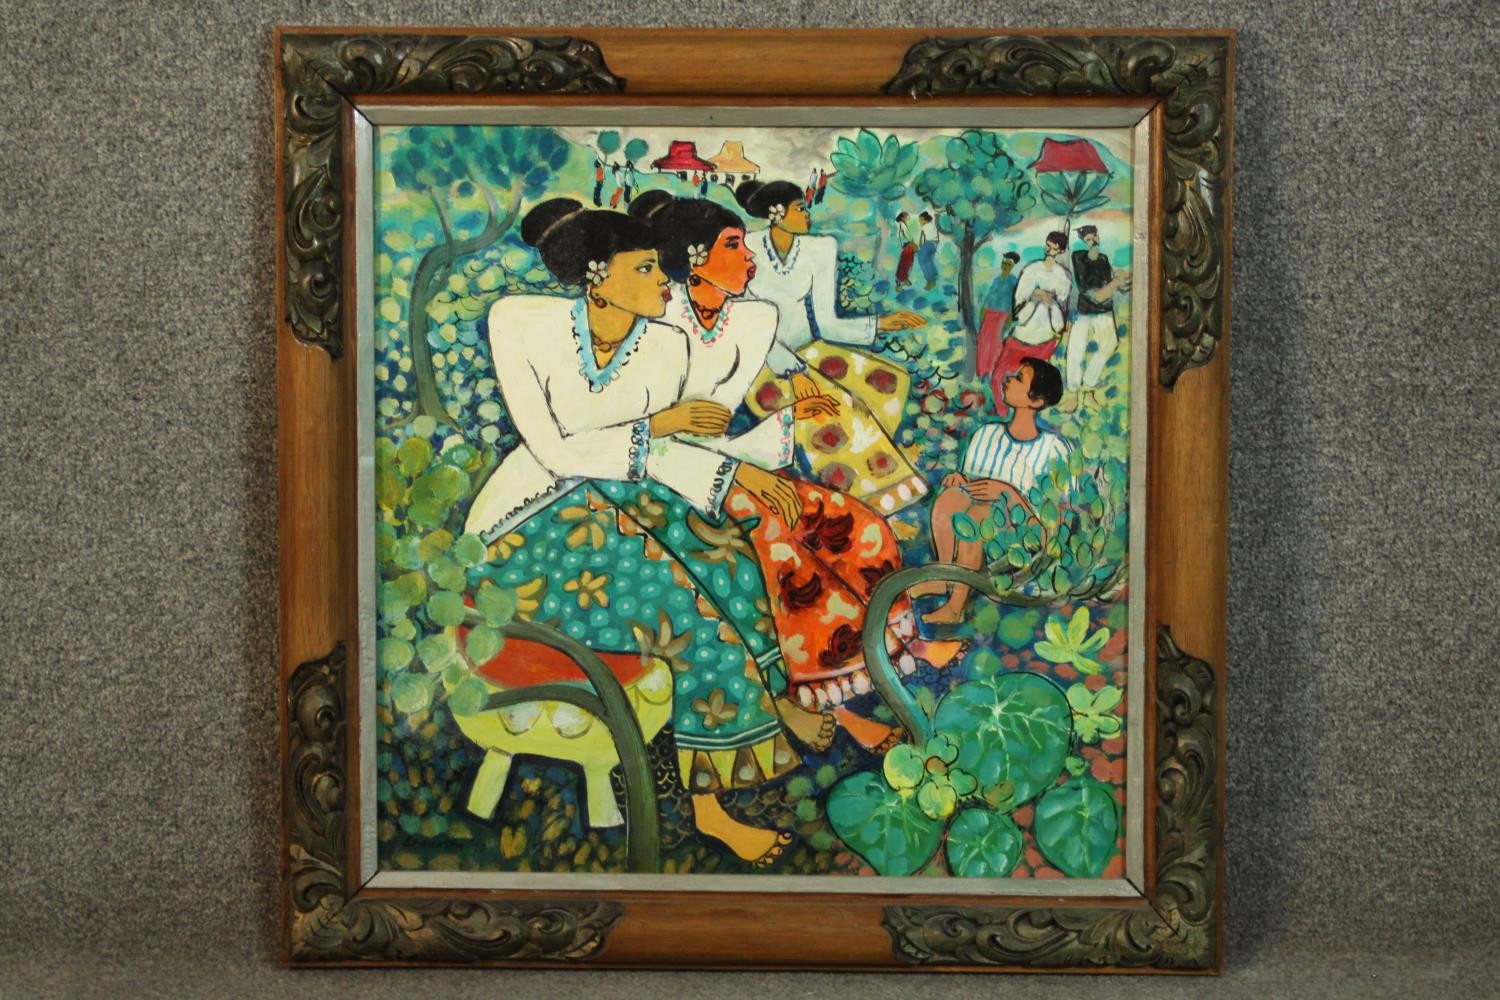 Bramasto (1929 - 1997), oil on canvas of three Indonesian women among foliage, with some figures - Image 2 of 7